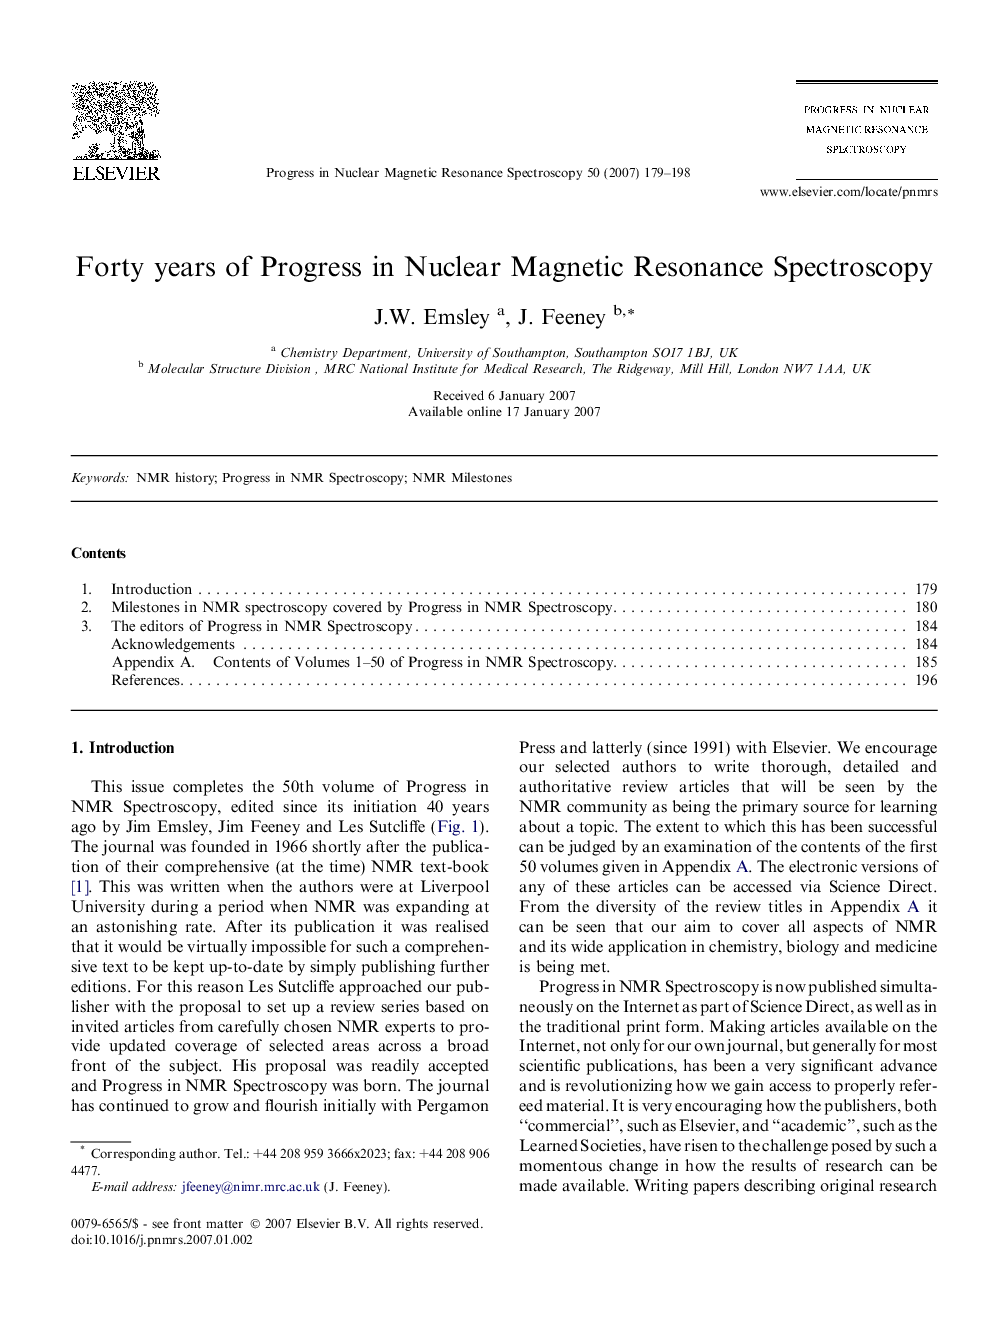 Forty years of Progress in Nuclear Magnetic Resonance Spectroscopy